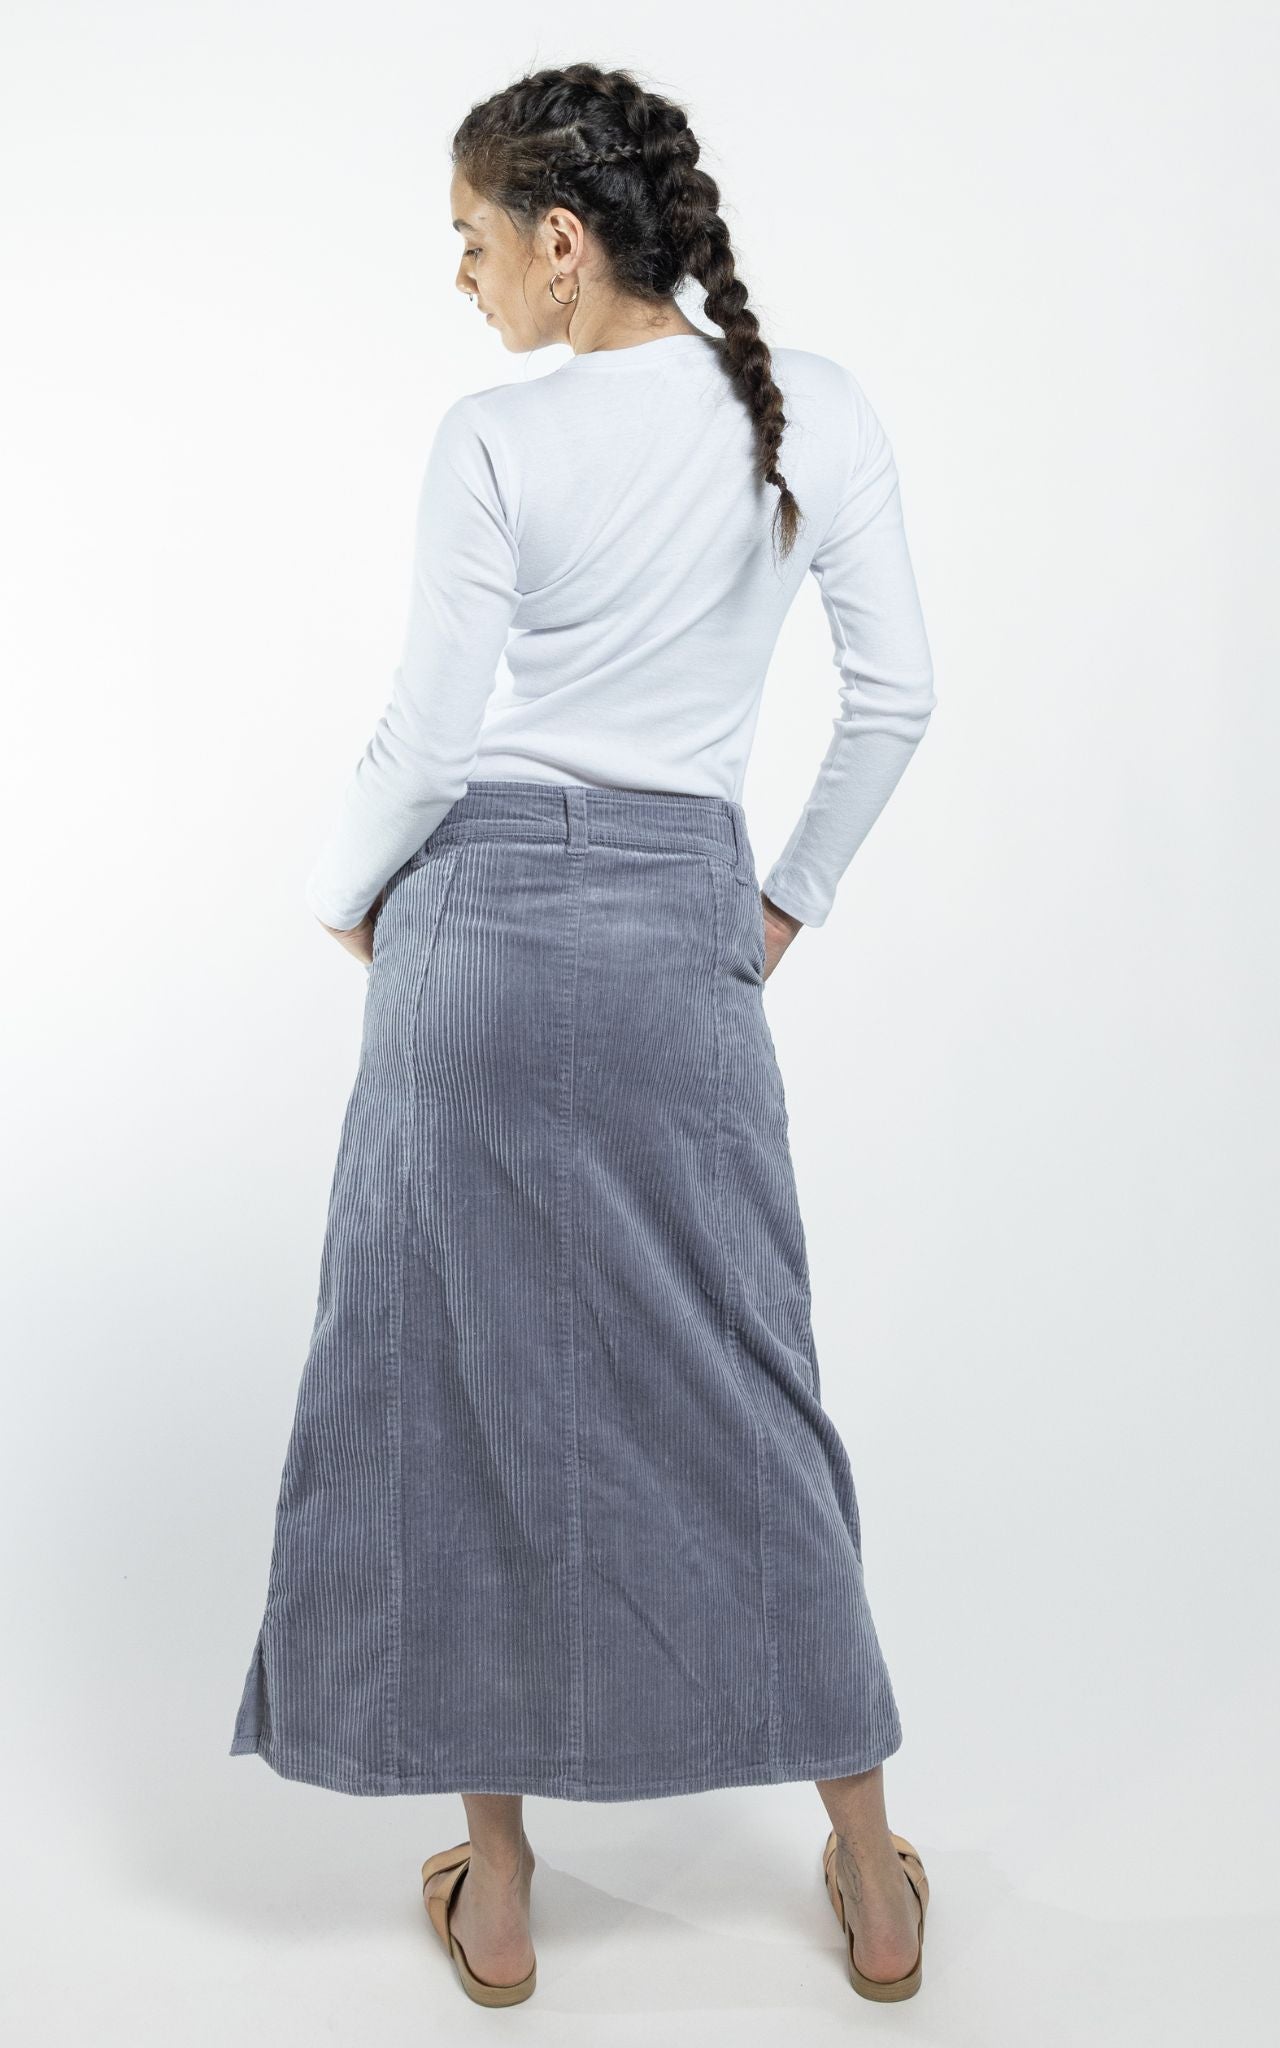 Surya Ethical Corduroy Maxi Skirt made in Nepal - Sky Blue